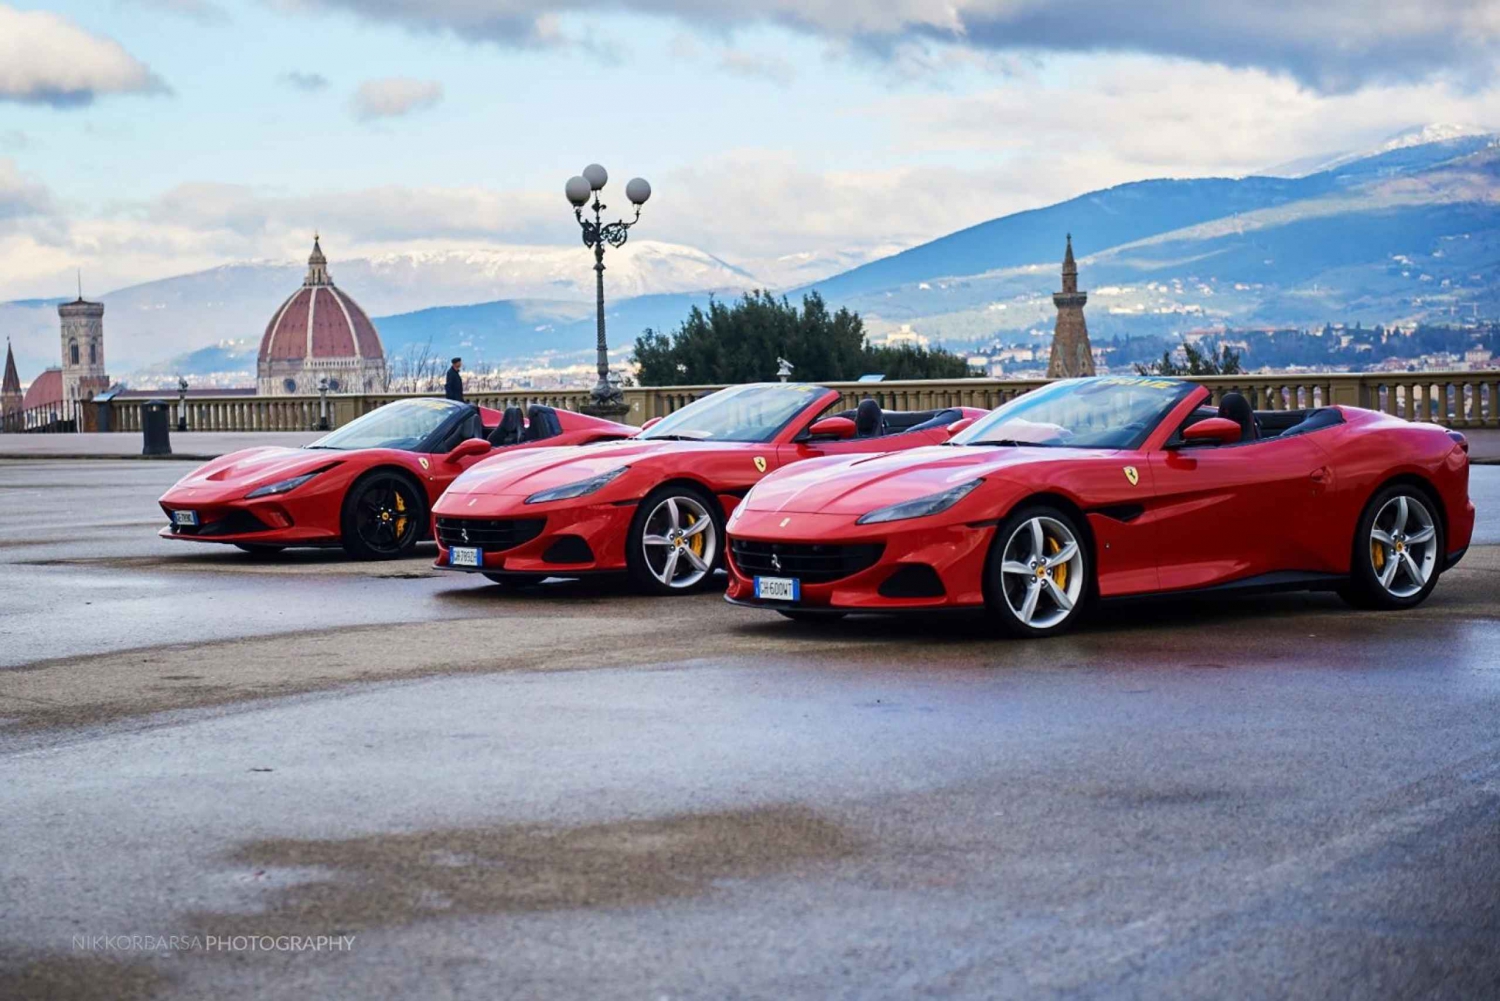 Florence: Ferrari Test Driver with a Private Instructor